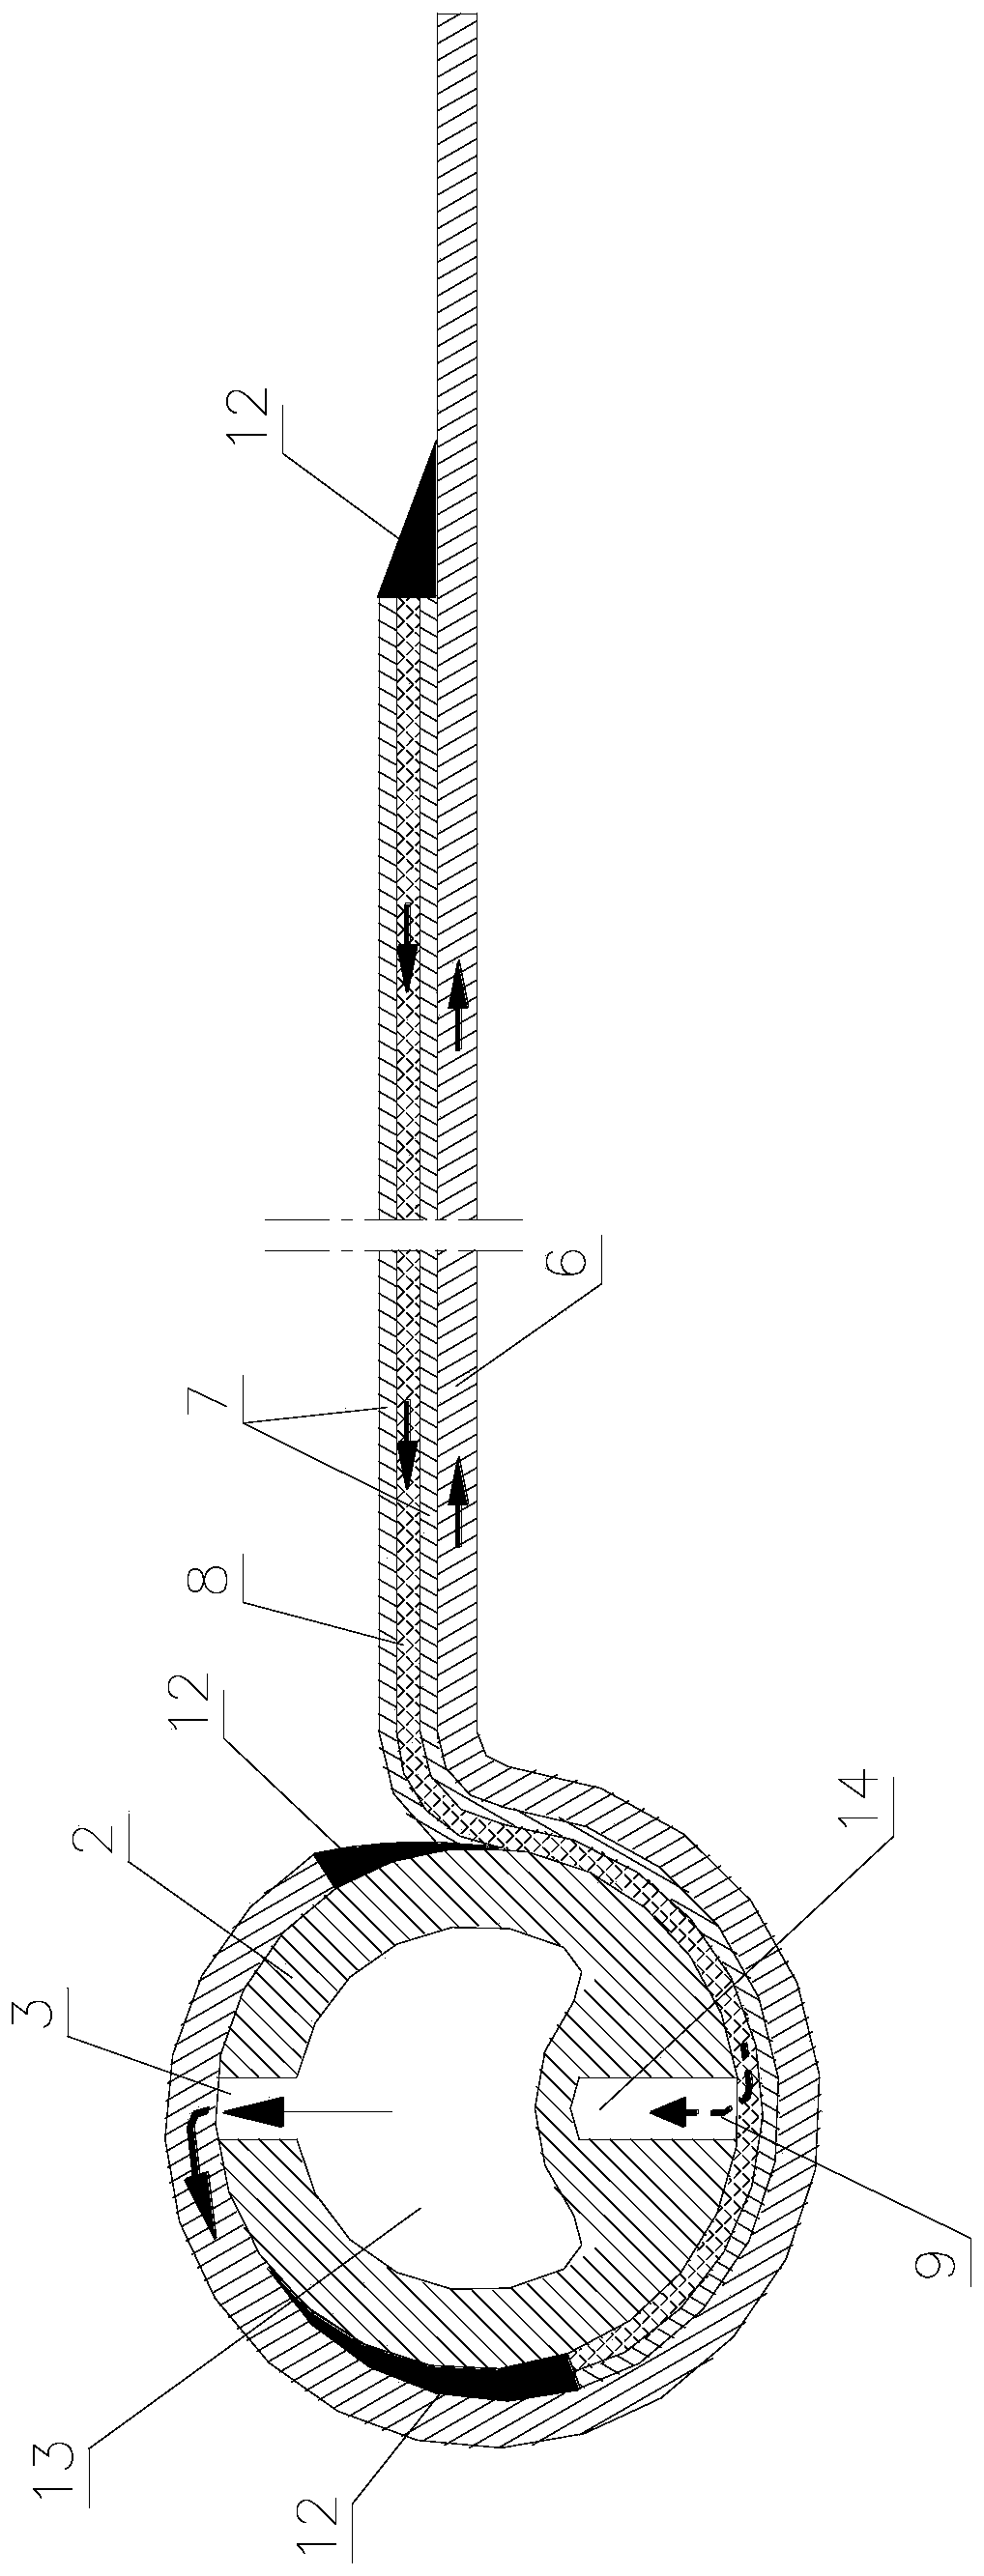 A roll-type membrane module and a filter element having the roll-type membrane module